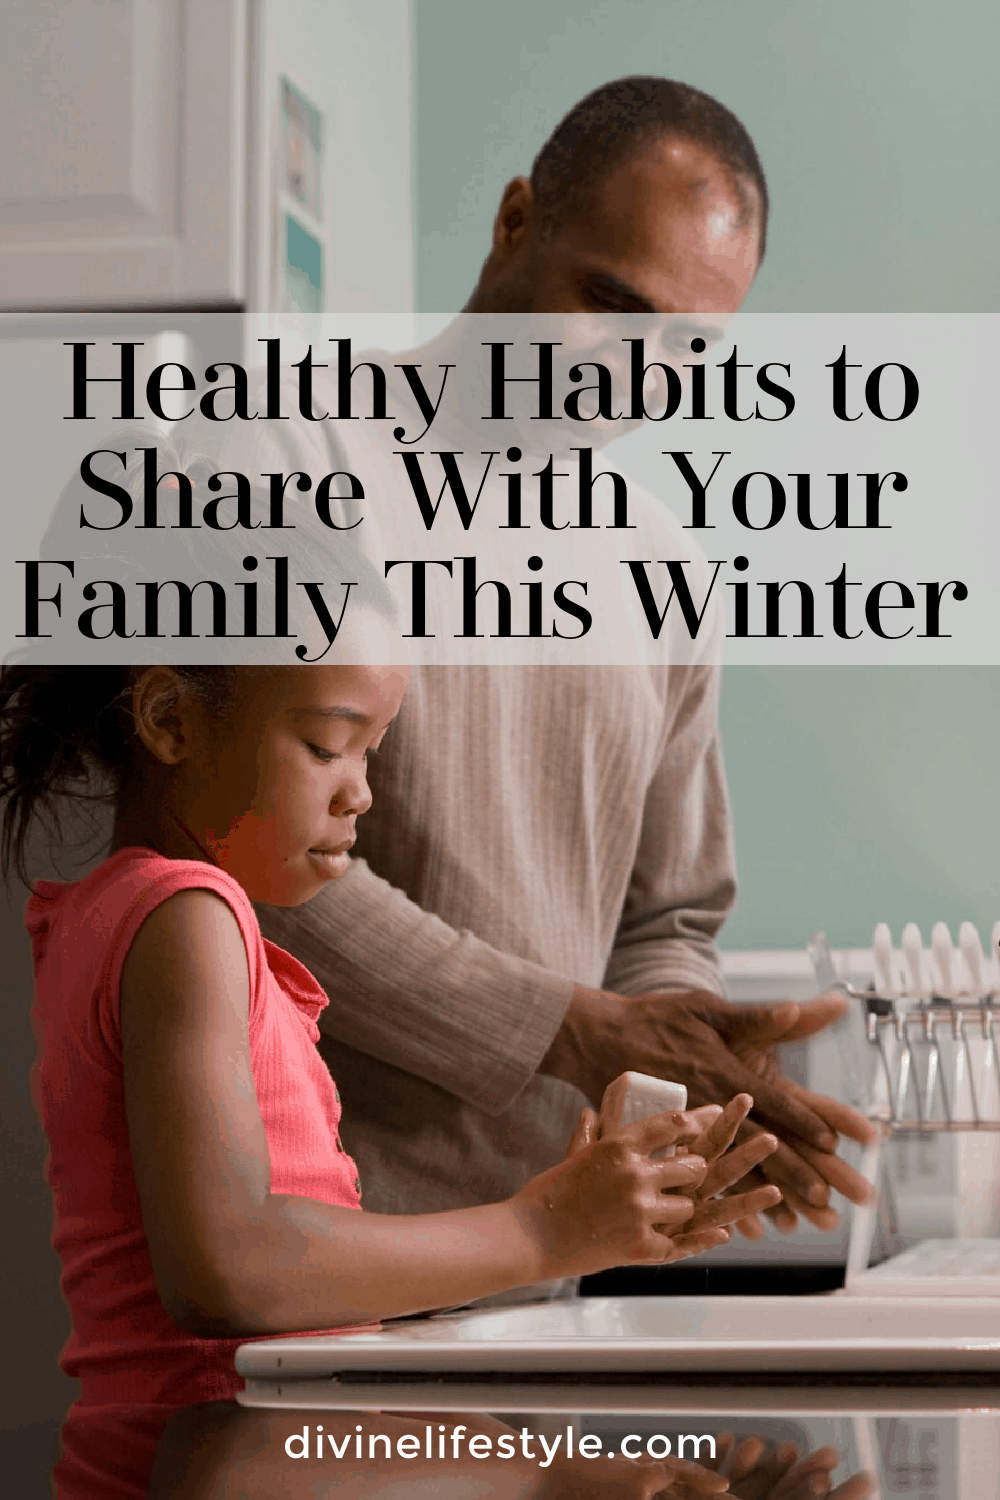 Healthy Habits to Share With Your Family This Winter